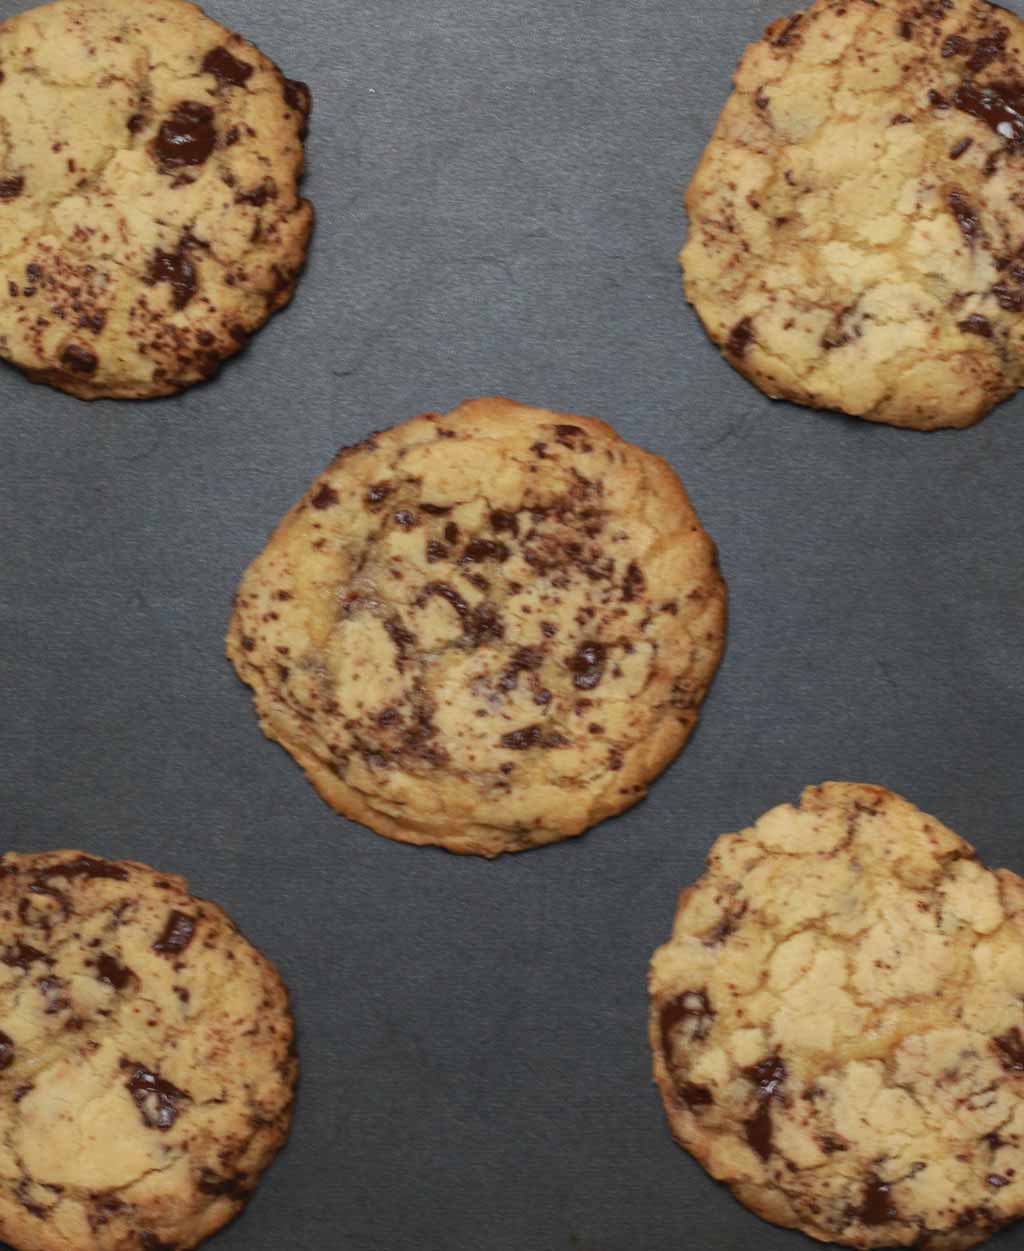 Baked Cookies On A Black Tray